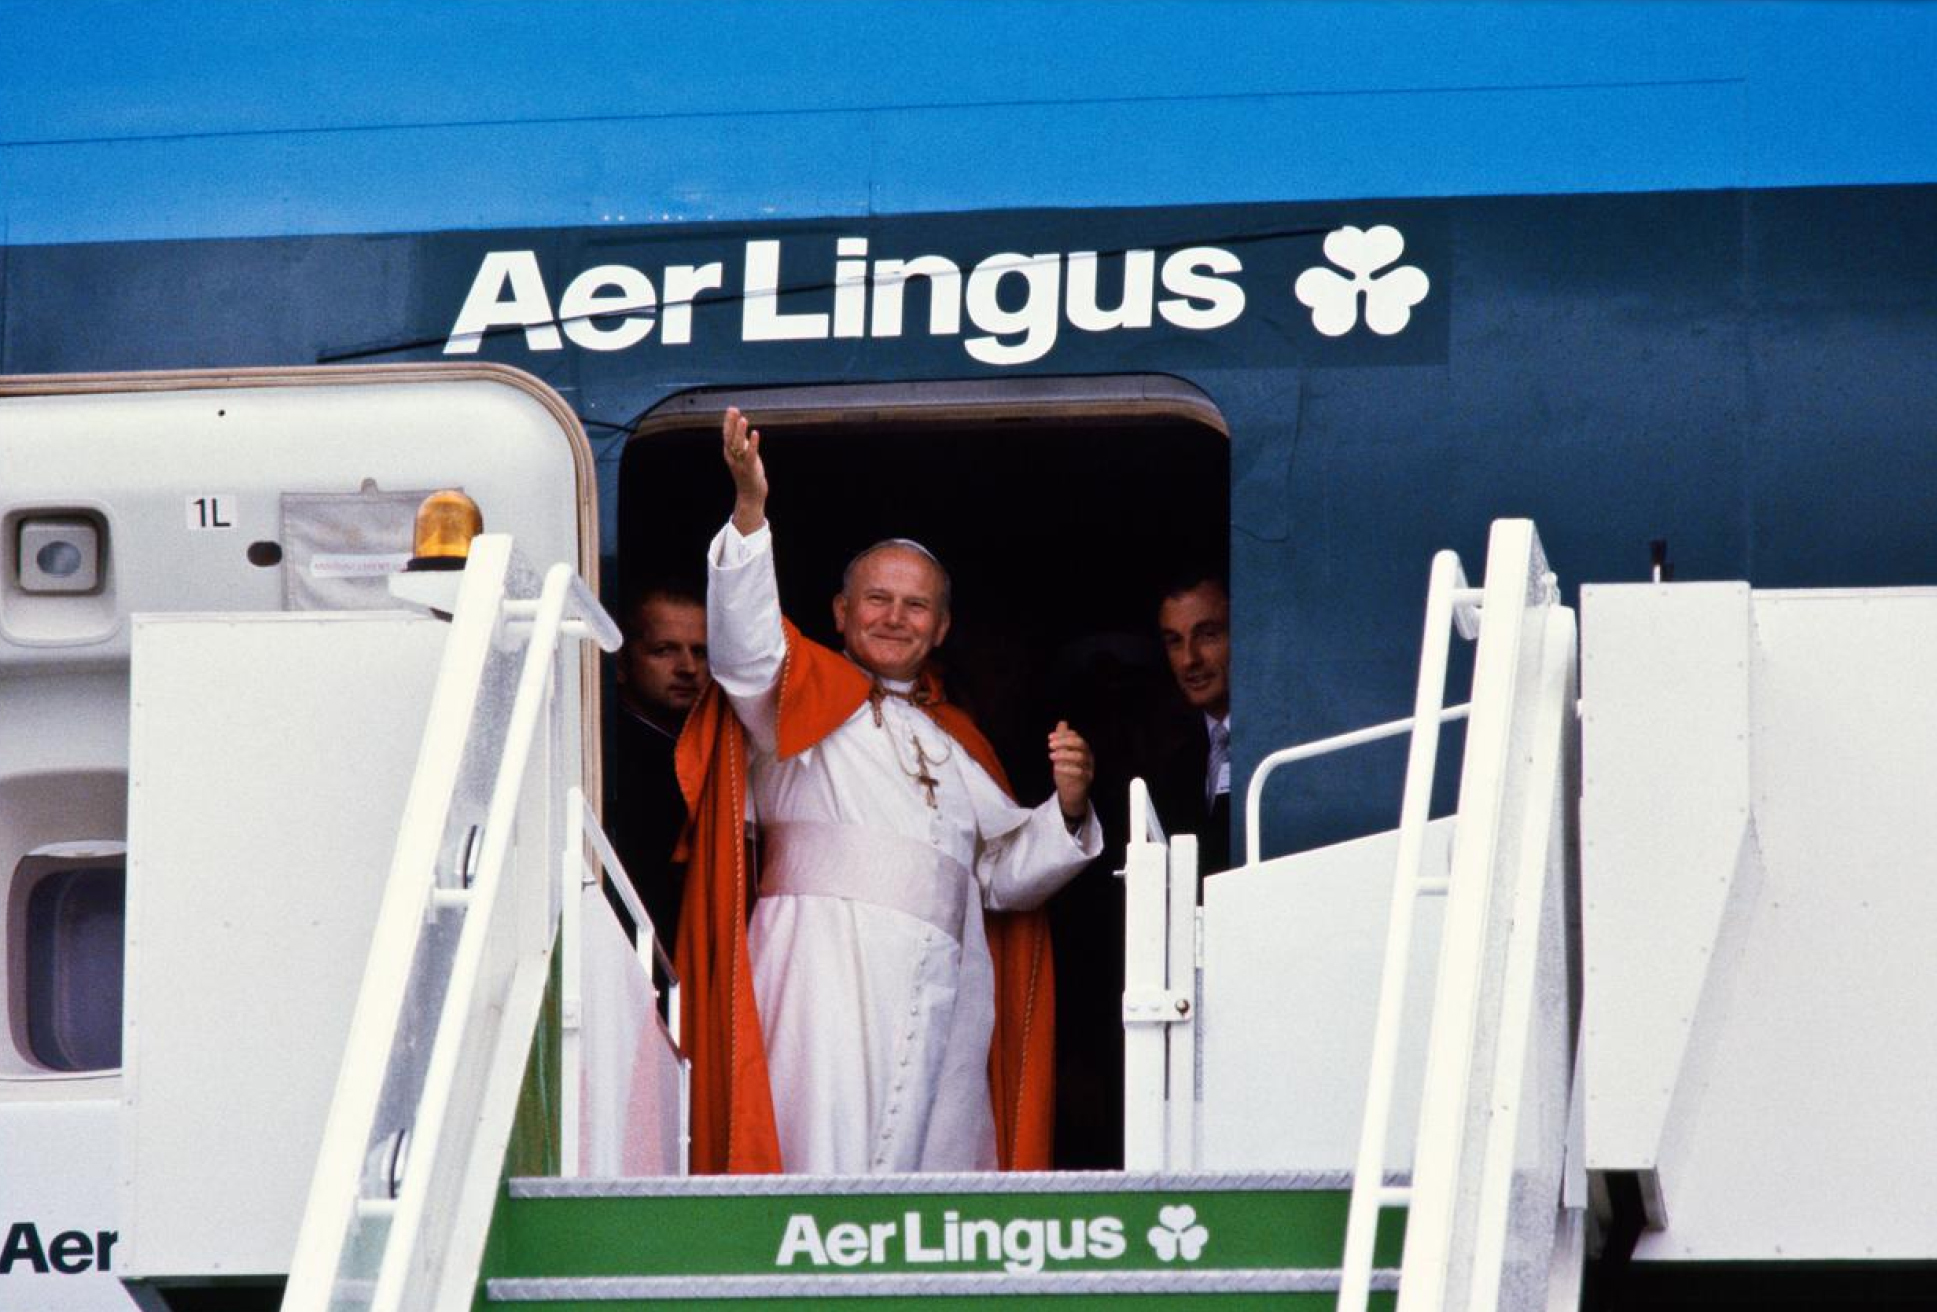 Pope John Paul II arrives on Aer Lingus during his trip to Ireland, 1978